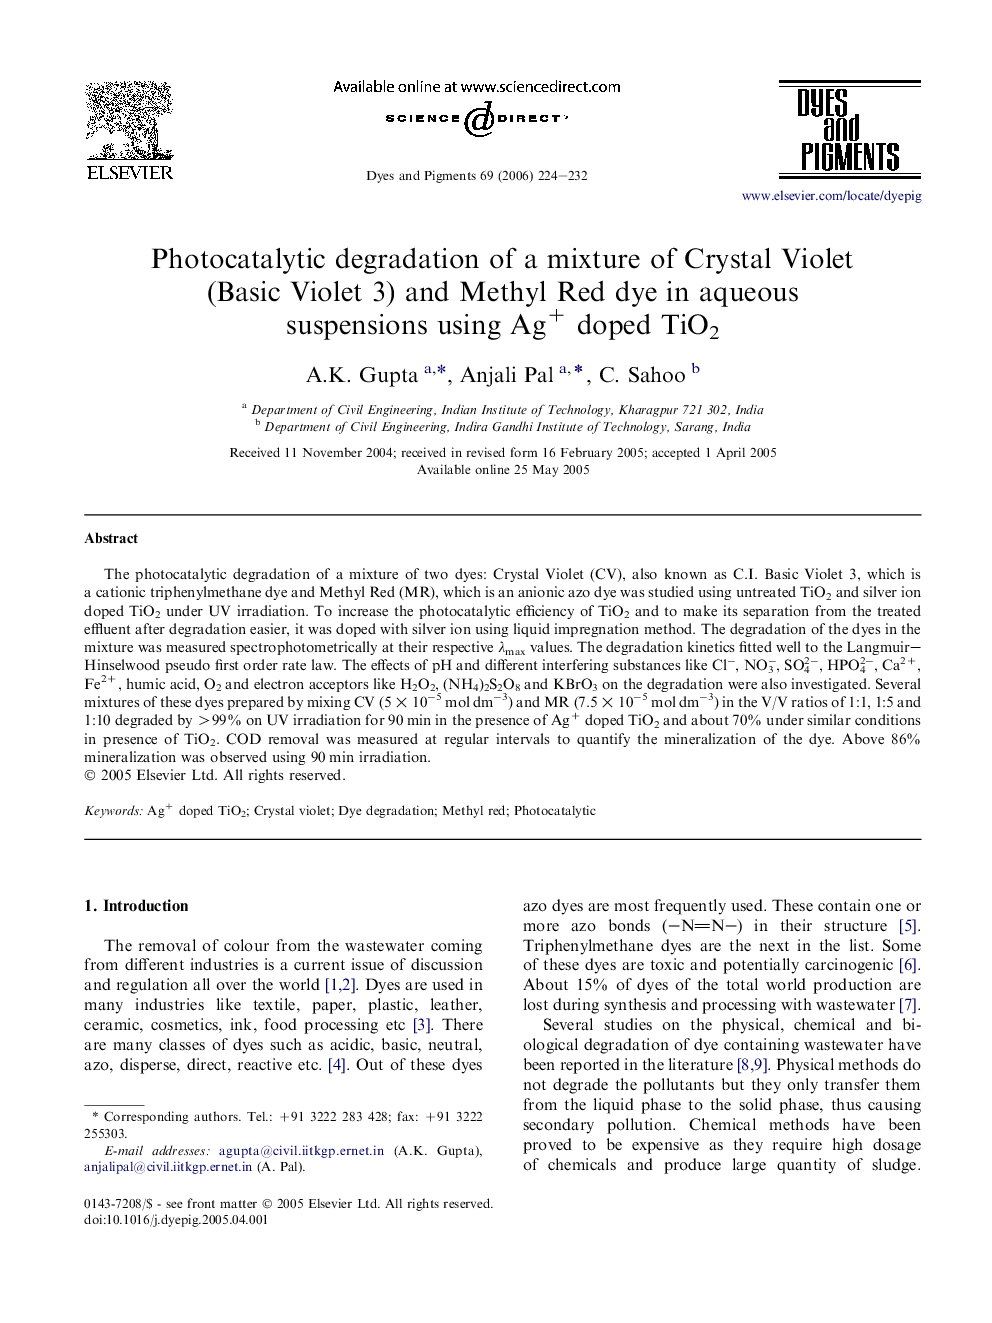 Photocatalytic degradation of a mixture of Crystal Violet (Basic Violet 3) and Methyl Red dye in aqueous suspensions using Ag+ doped TiO2